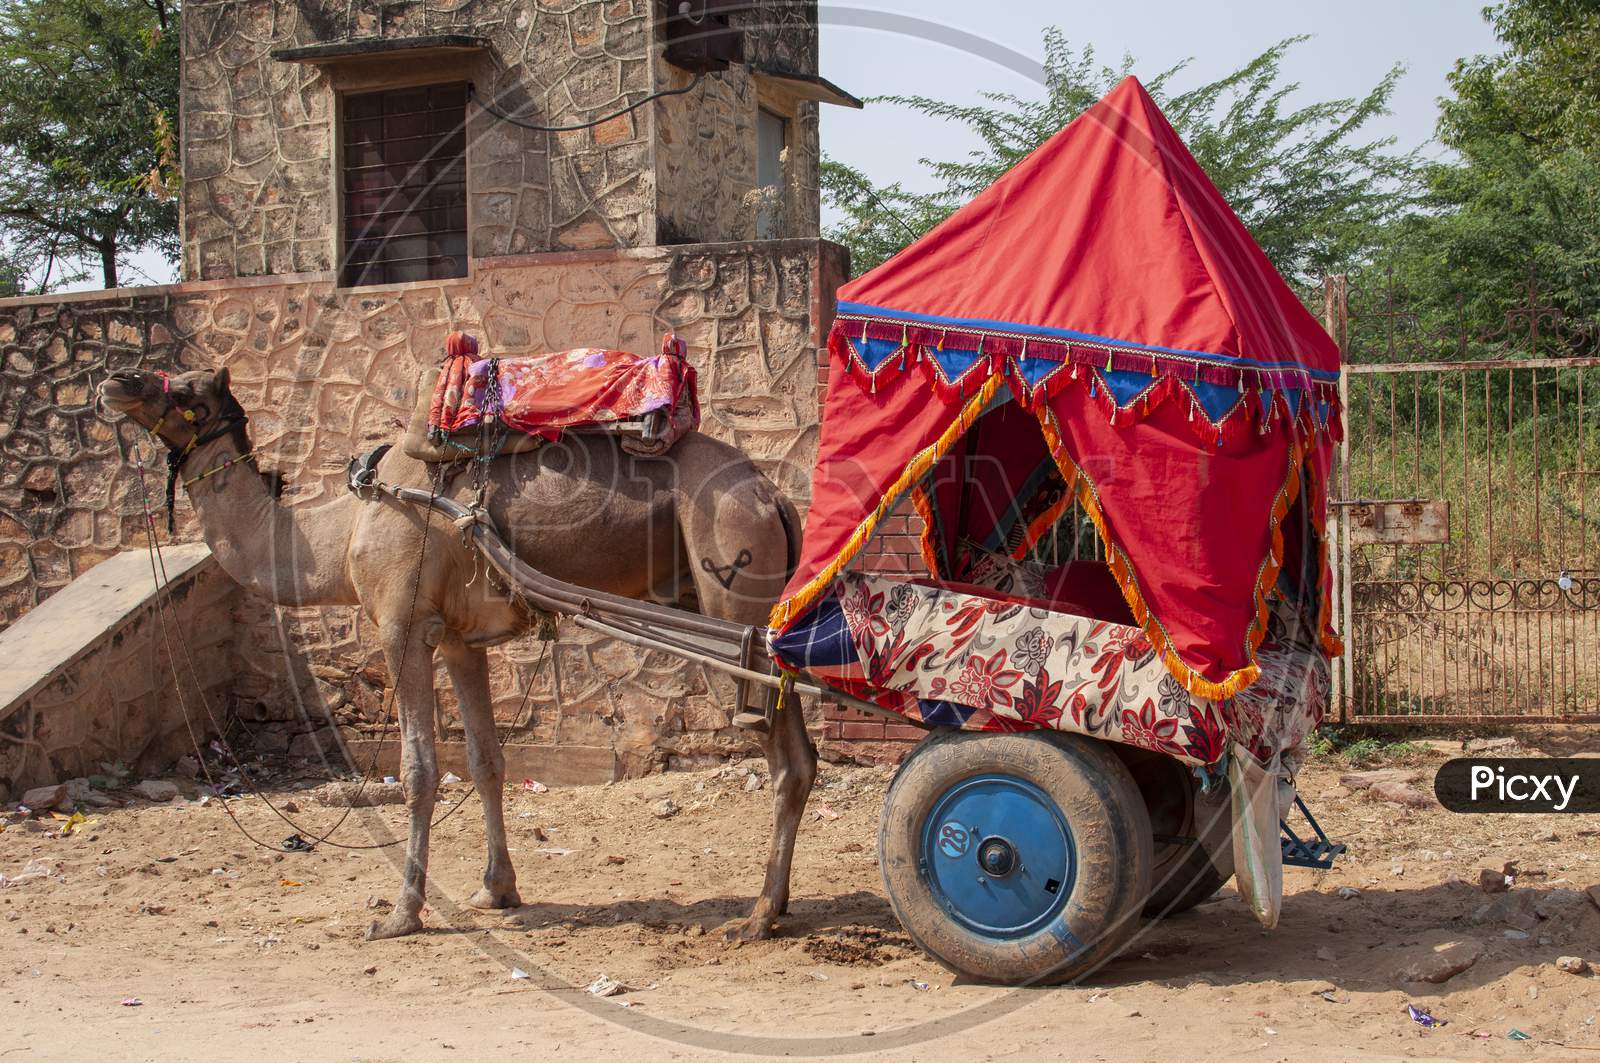 The Camel Is Part Of The Landscape Of Rajasthan; The Icon Of The Desert State, Part Of Its Cultural Identity, And An Economically Important Animal For Desert Communities